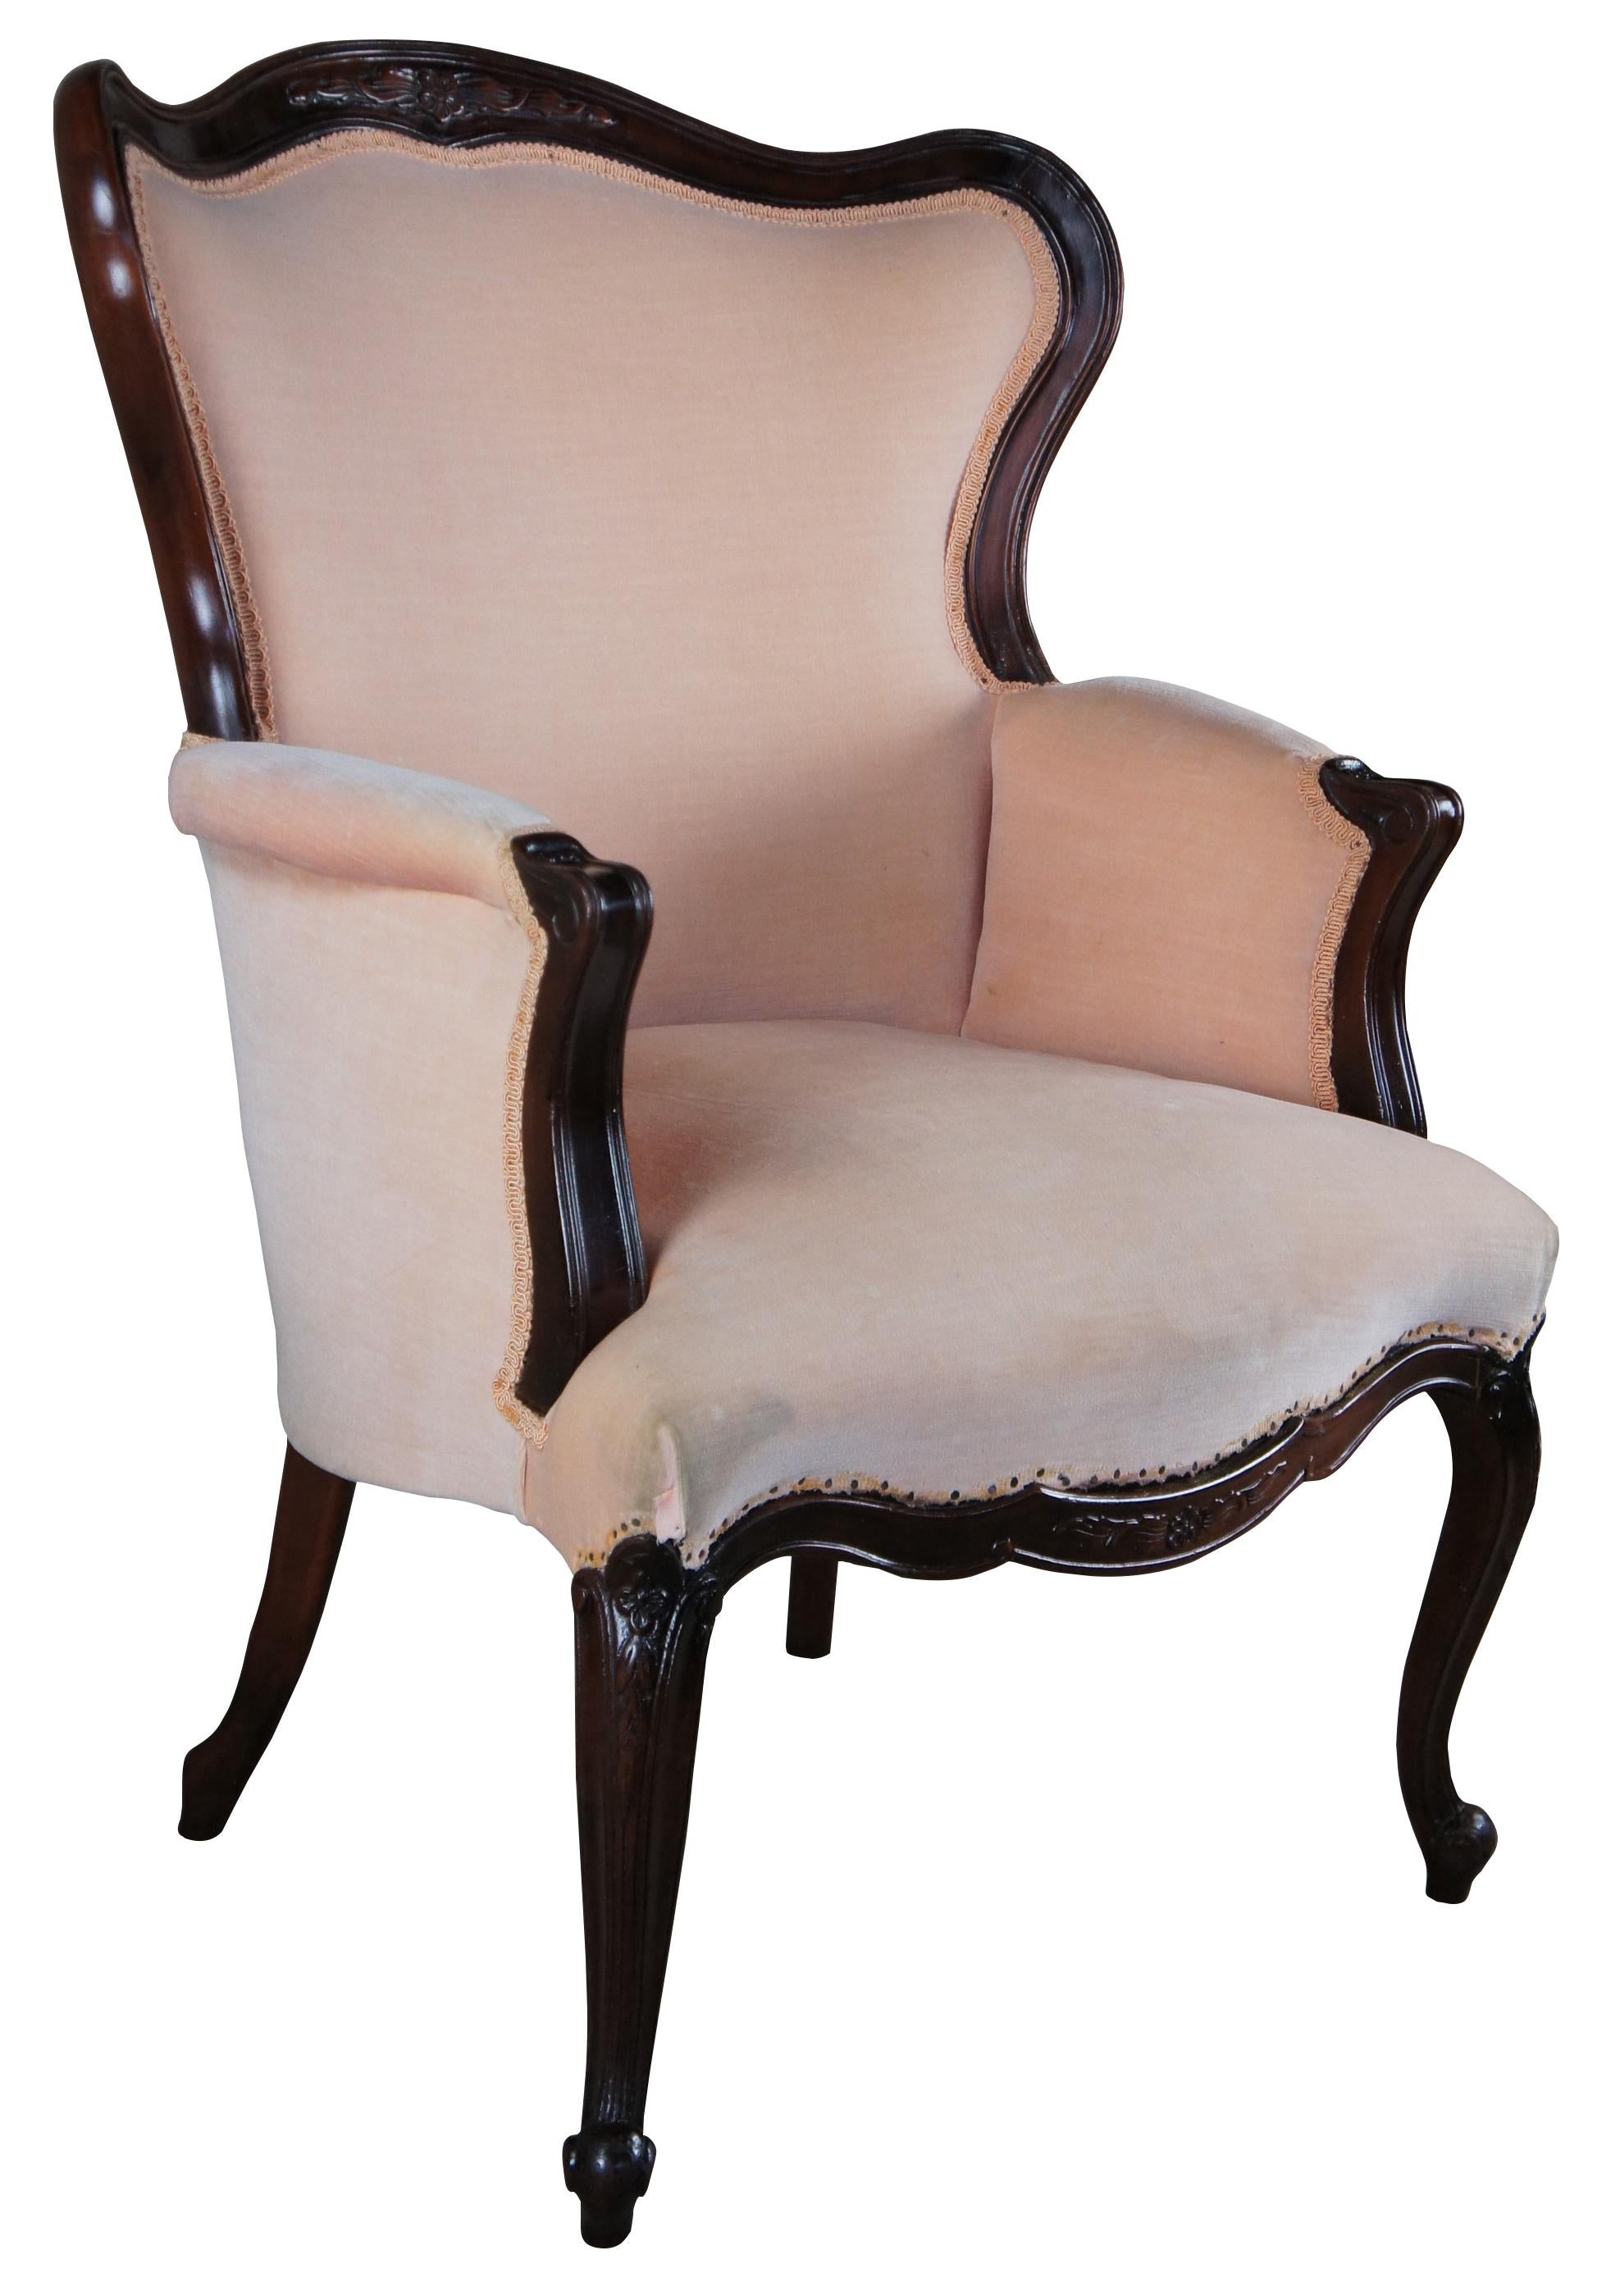 Early 20th century Late Victorian French Provincial inspired wingback arm chair. Made from mahogany with a serpentine carved crest and lower apron, pink fabric and cabriole legs with knee carved foliate leading to scrolled feet. 
 